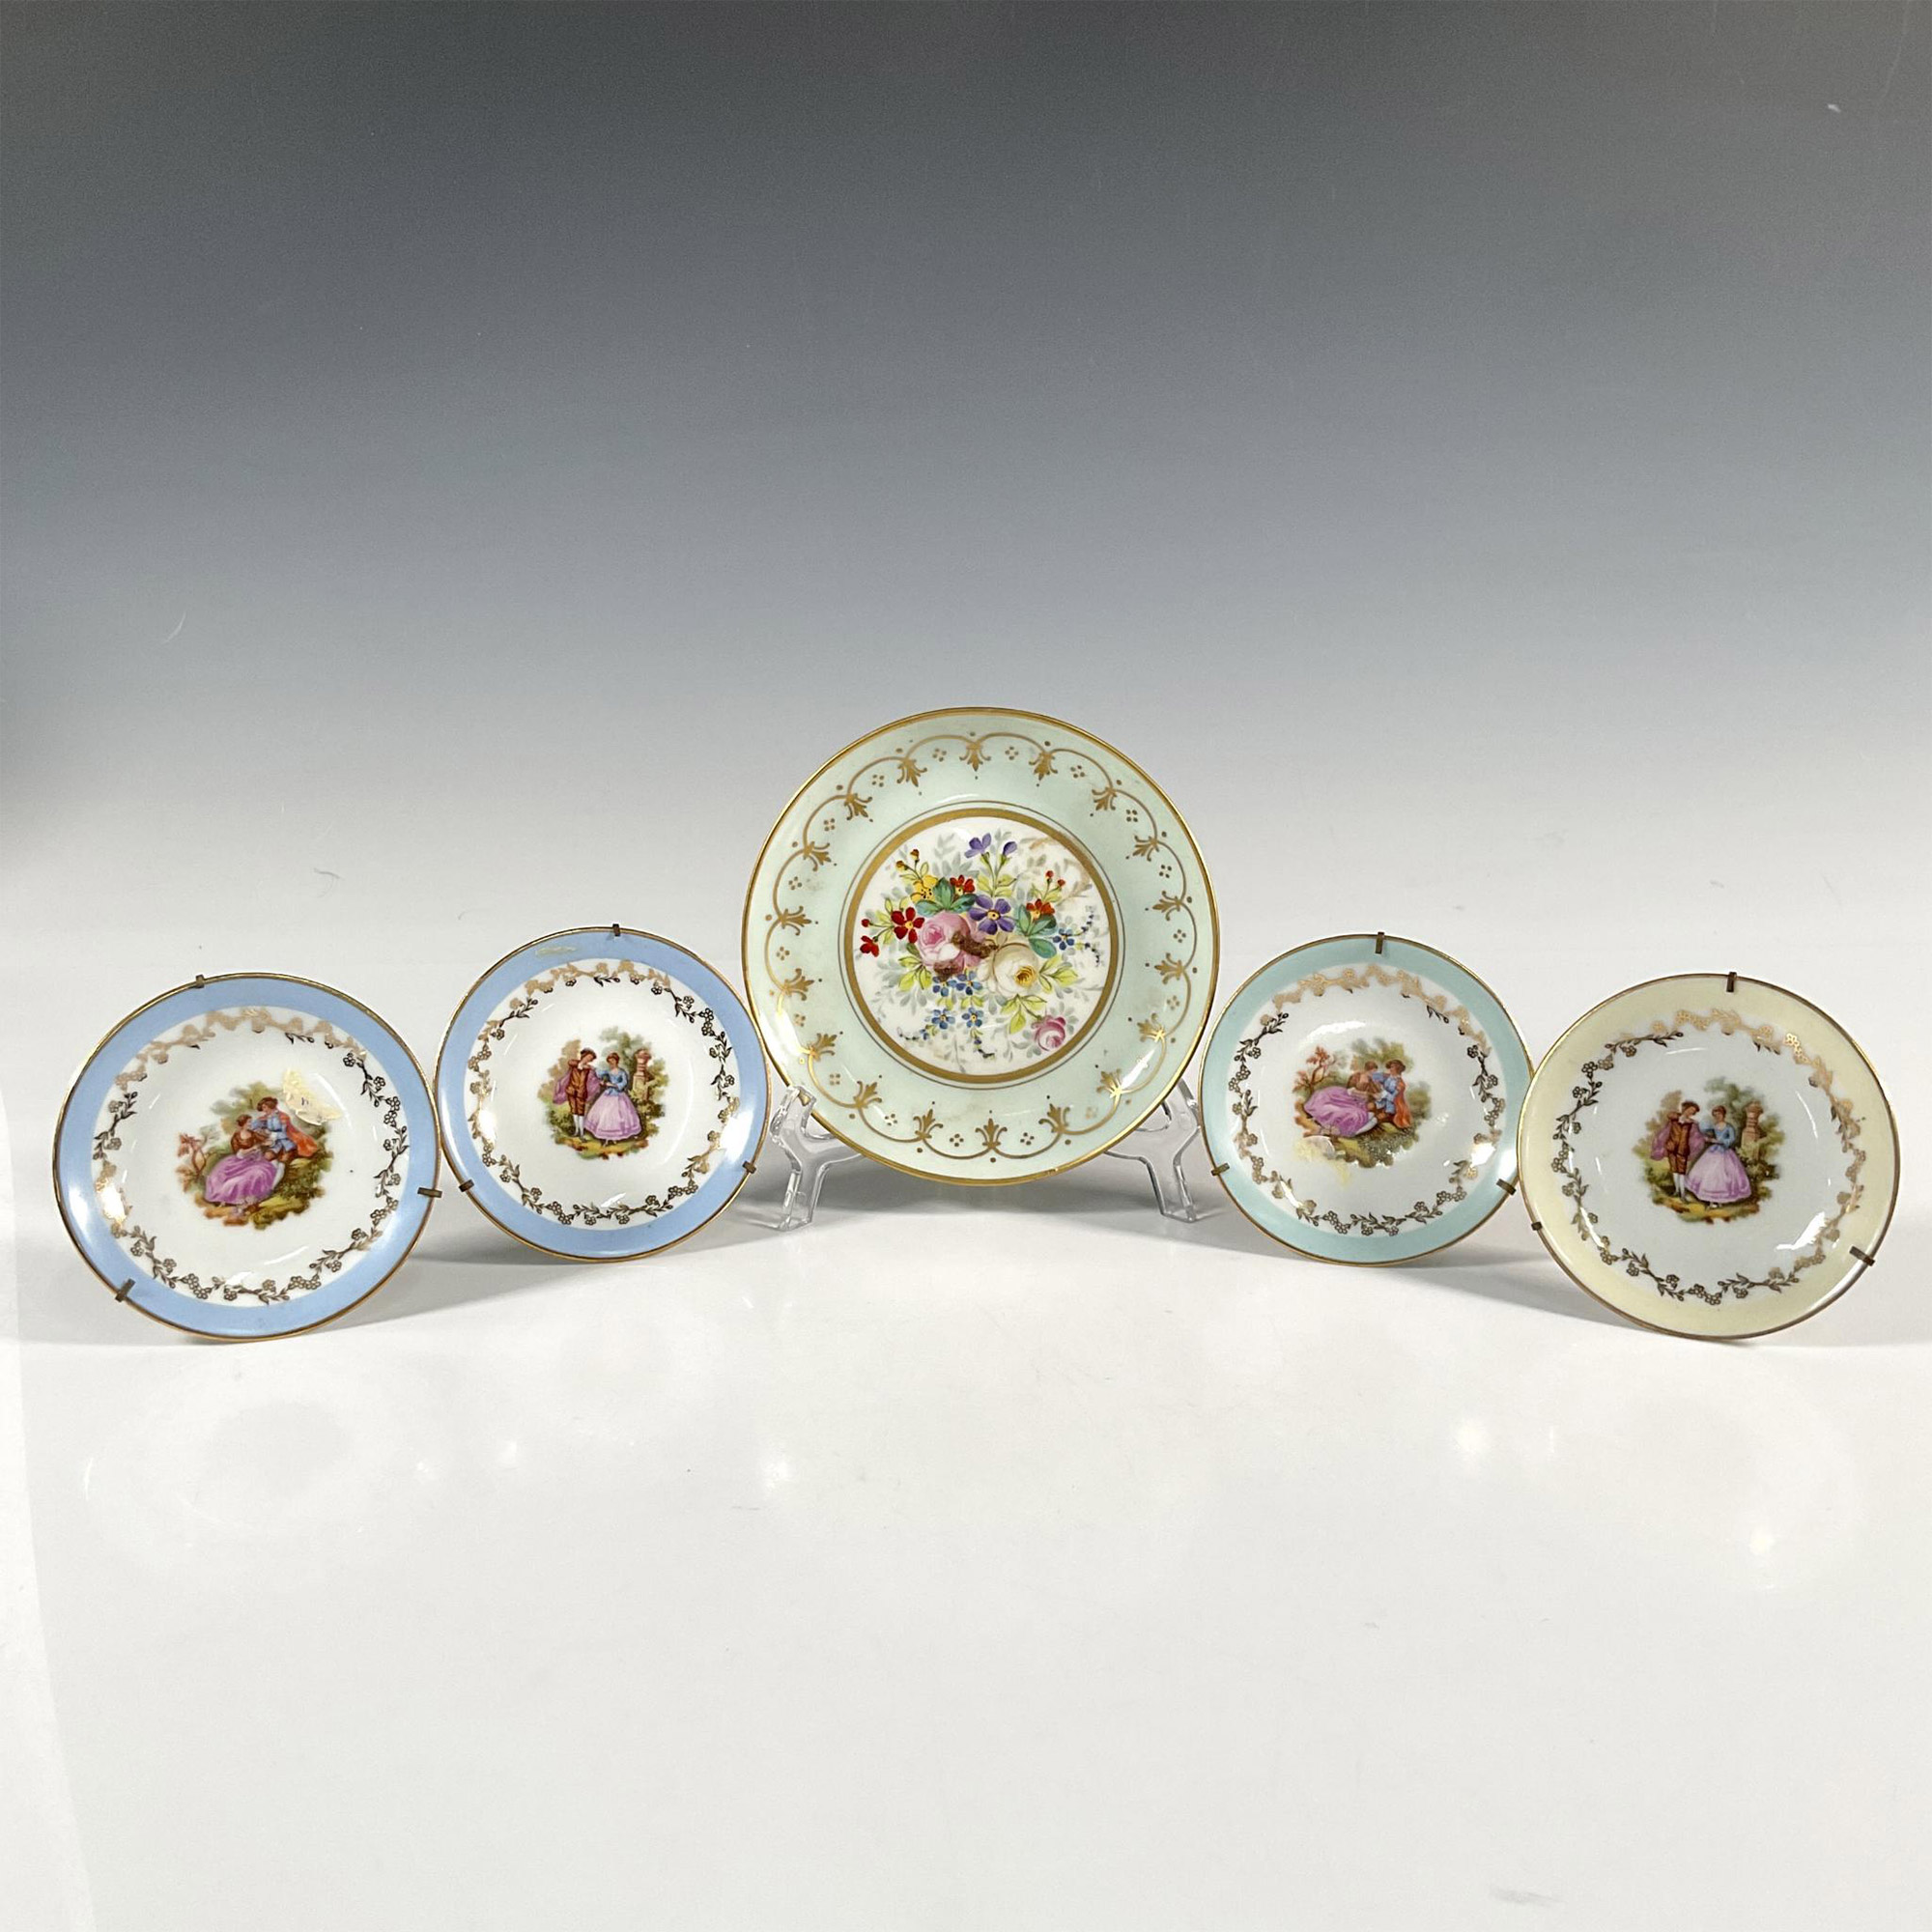 5pc French Limoges Cabinet Plates - Image 2 of 3